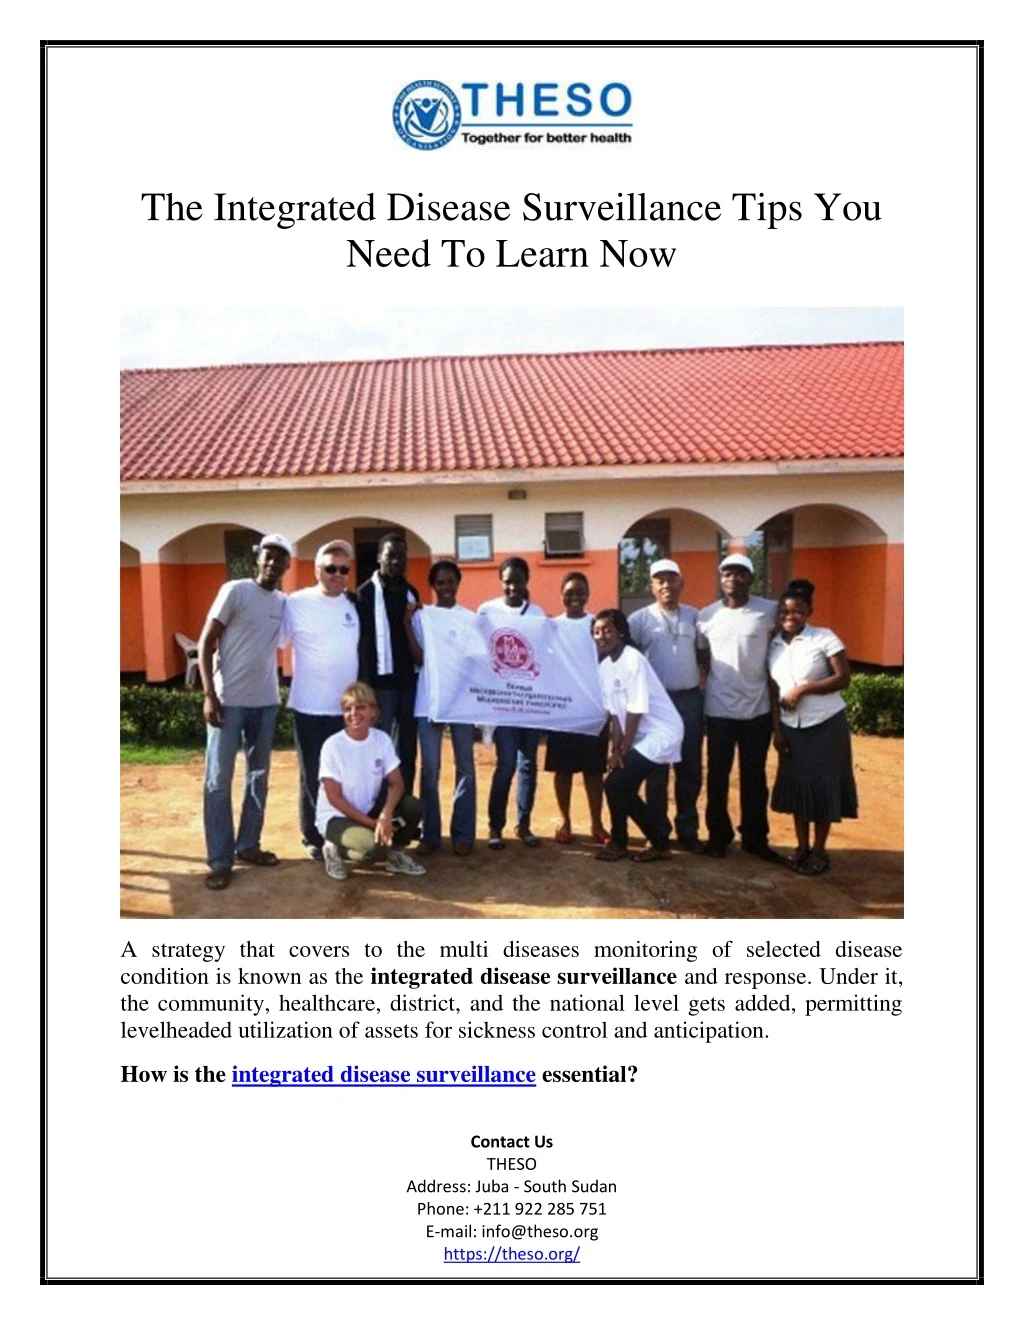 the integrated disease surveillance tips you need